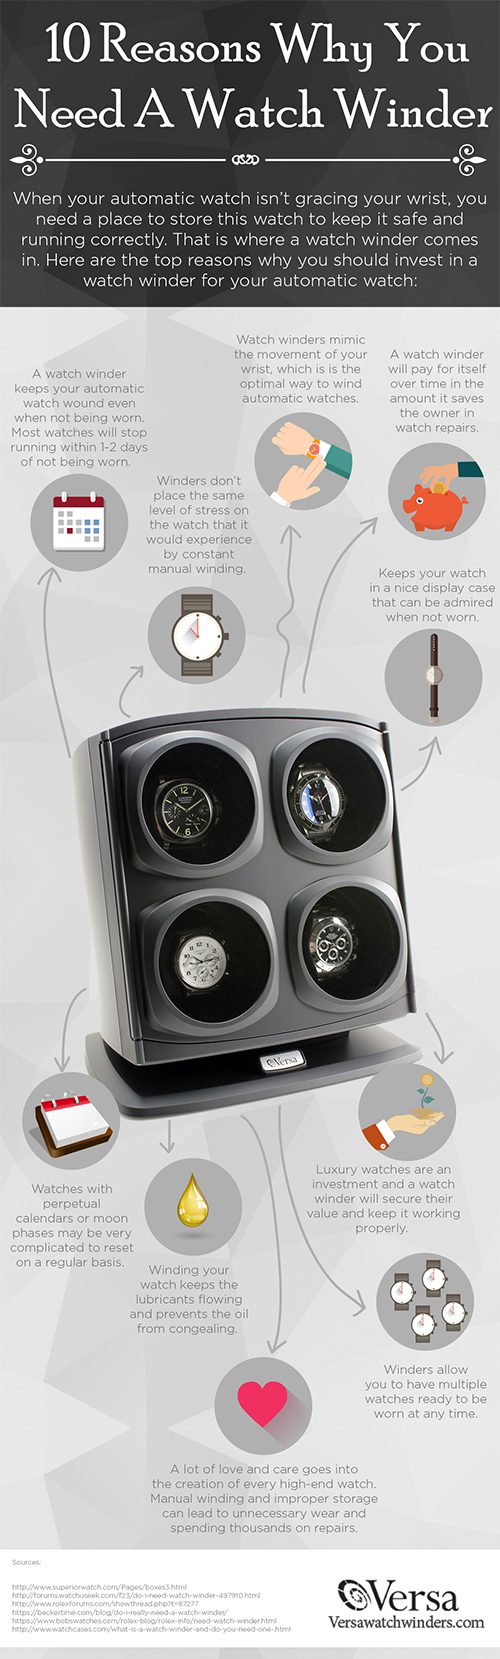 Why Need a Watch Winder Infographic